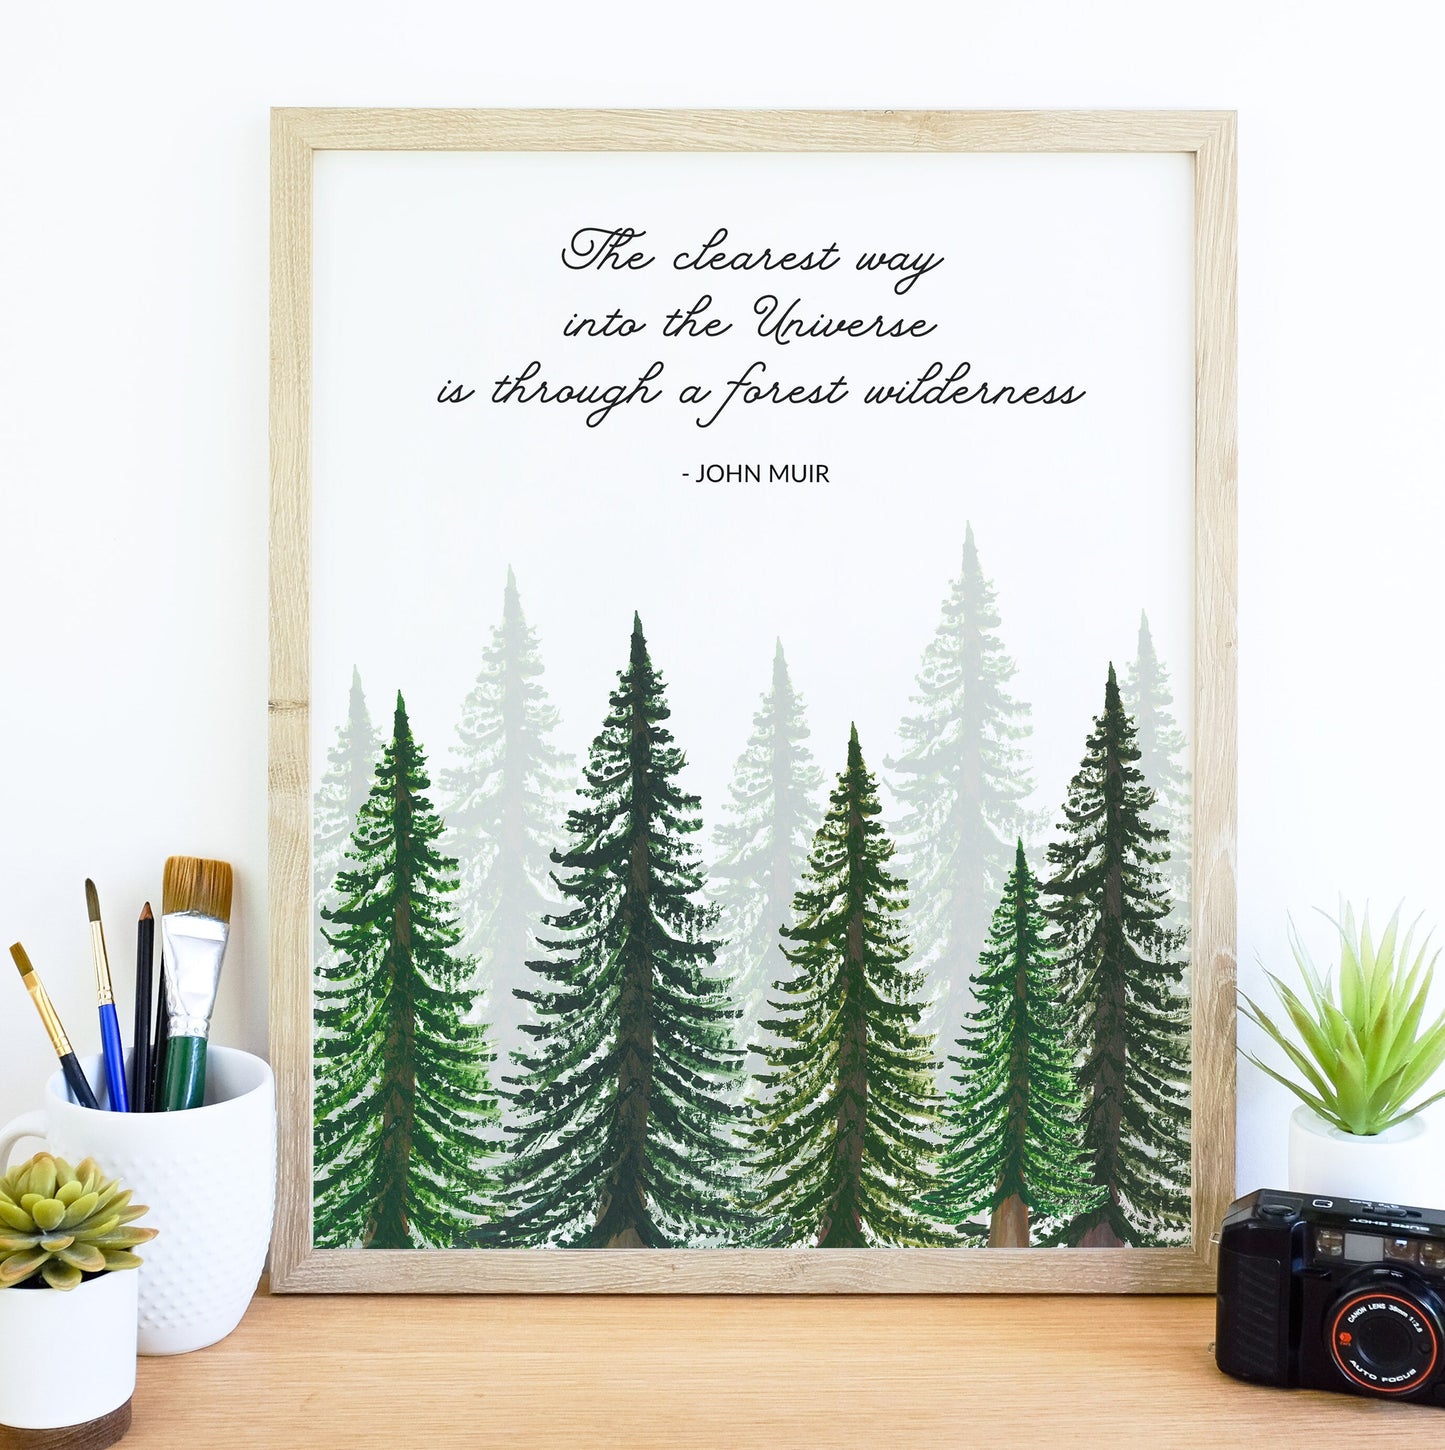 John Muir Quote Print, Muir quote saying, Nature poetry, Nature Quote Art, Men's Gift, Forest Evergreen Trees Print, Item Code - COTC PR08